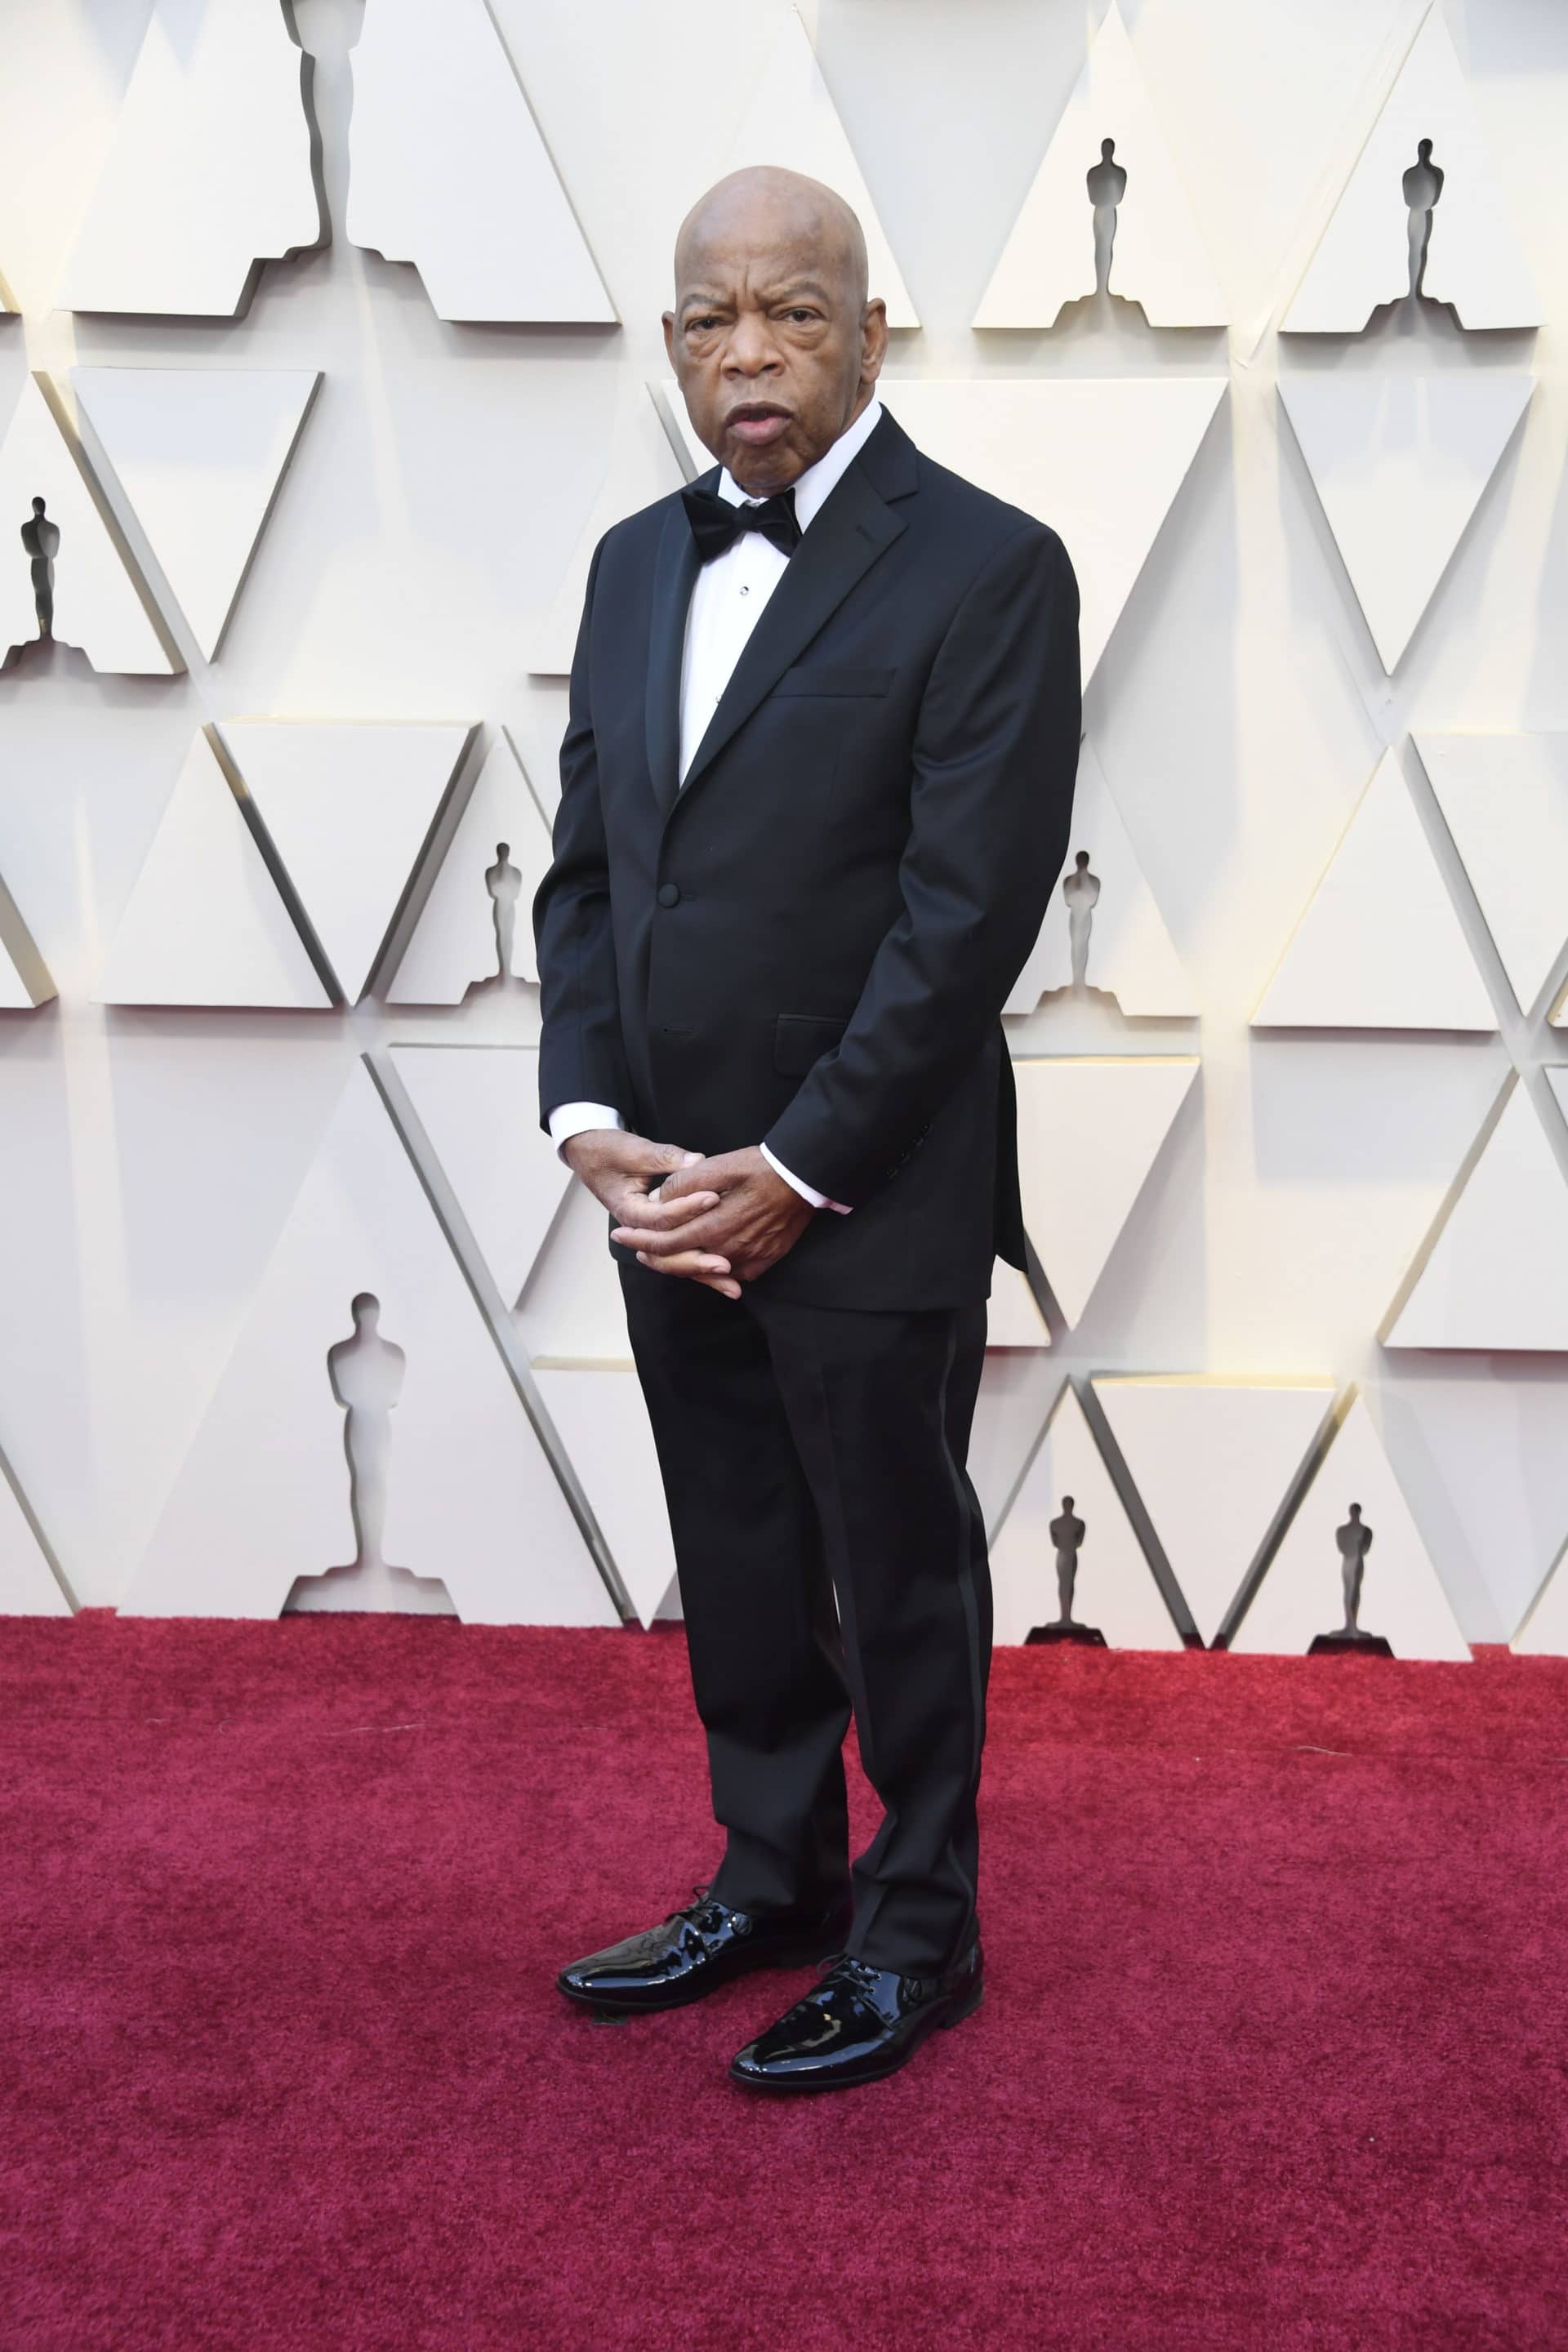 The Oscars 2019 Best-Dressed Men Were Suited, Booted & Did Not Come To Play!